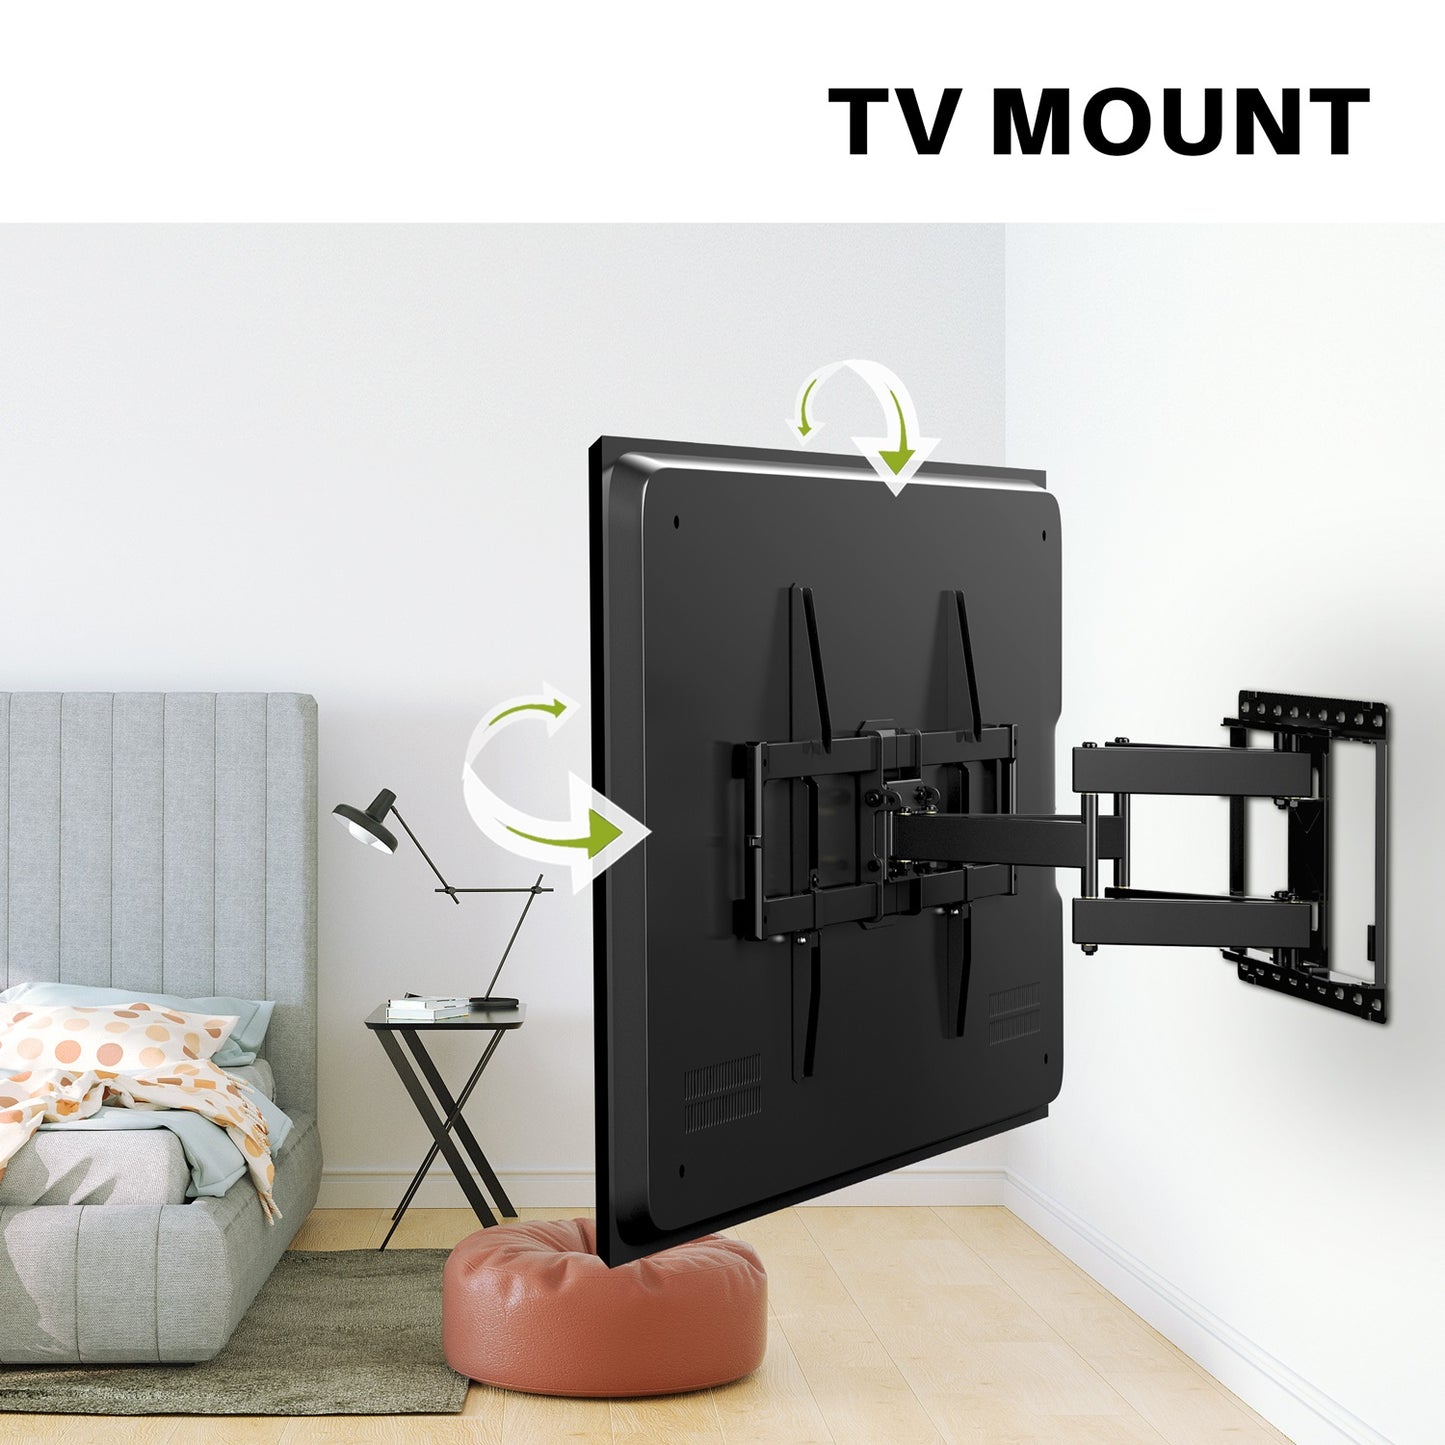 MountingAll Full Motion TV Wall Mount for Most 47-84 inch Flat Screen/LED/4K TV, TV Mount Bracket Dual Swivel Articulating Tilt 6 Arms, Max VESA 600x400mm, Holds up to 132lbs, Fits 8” 12” 16" Wood Studs